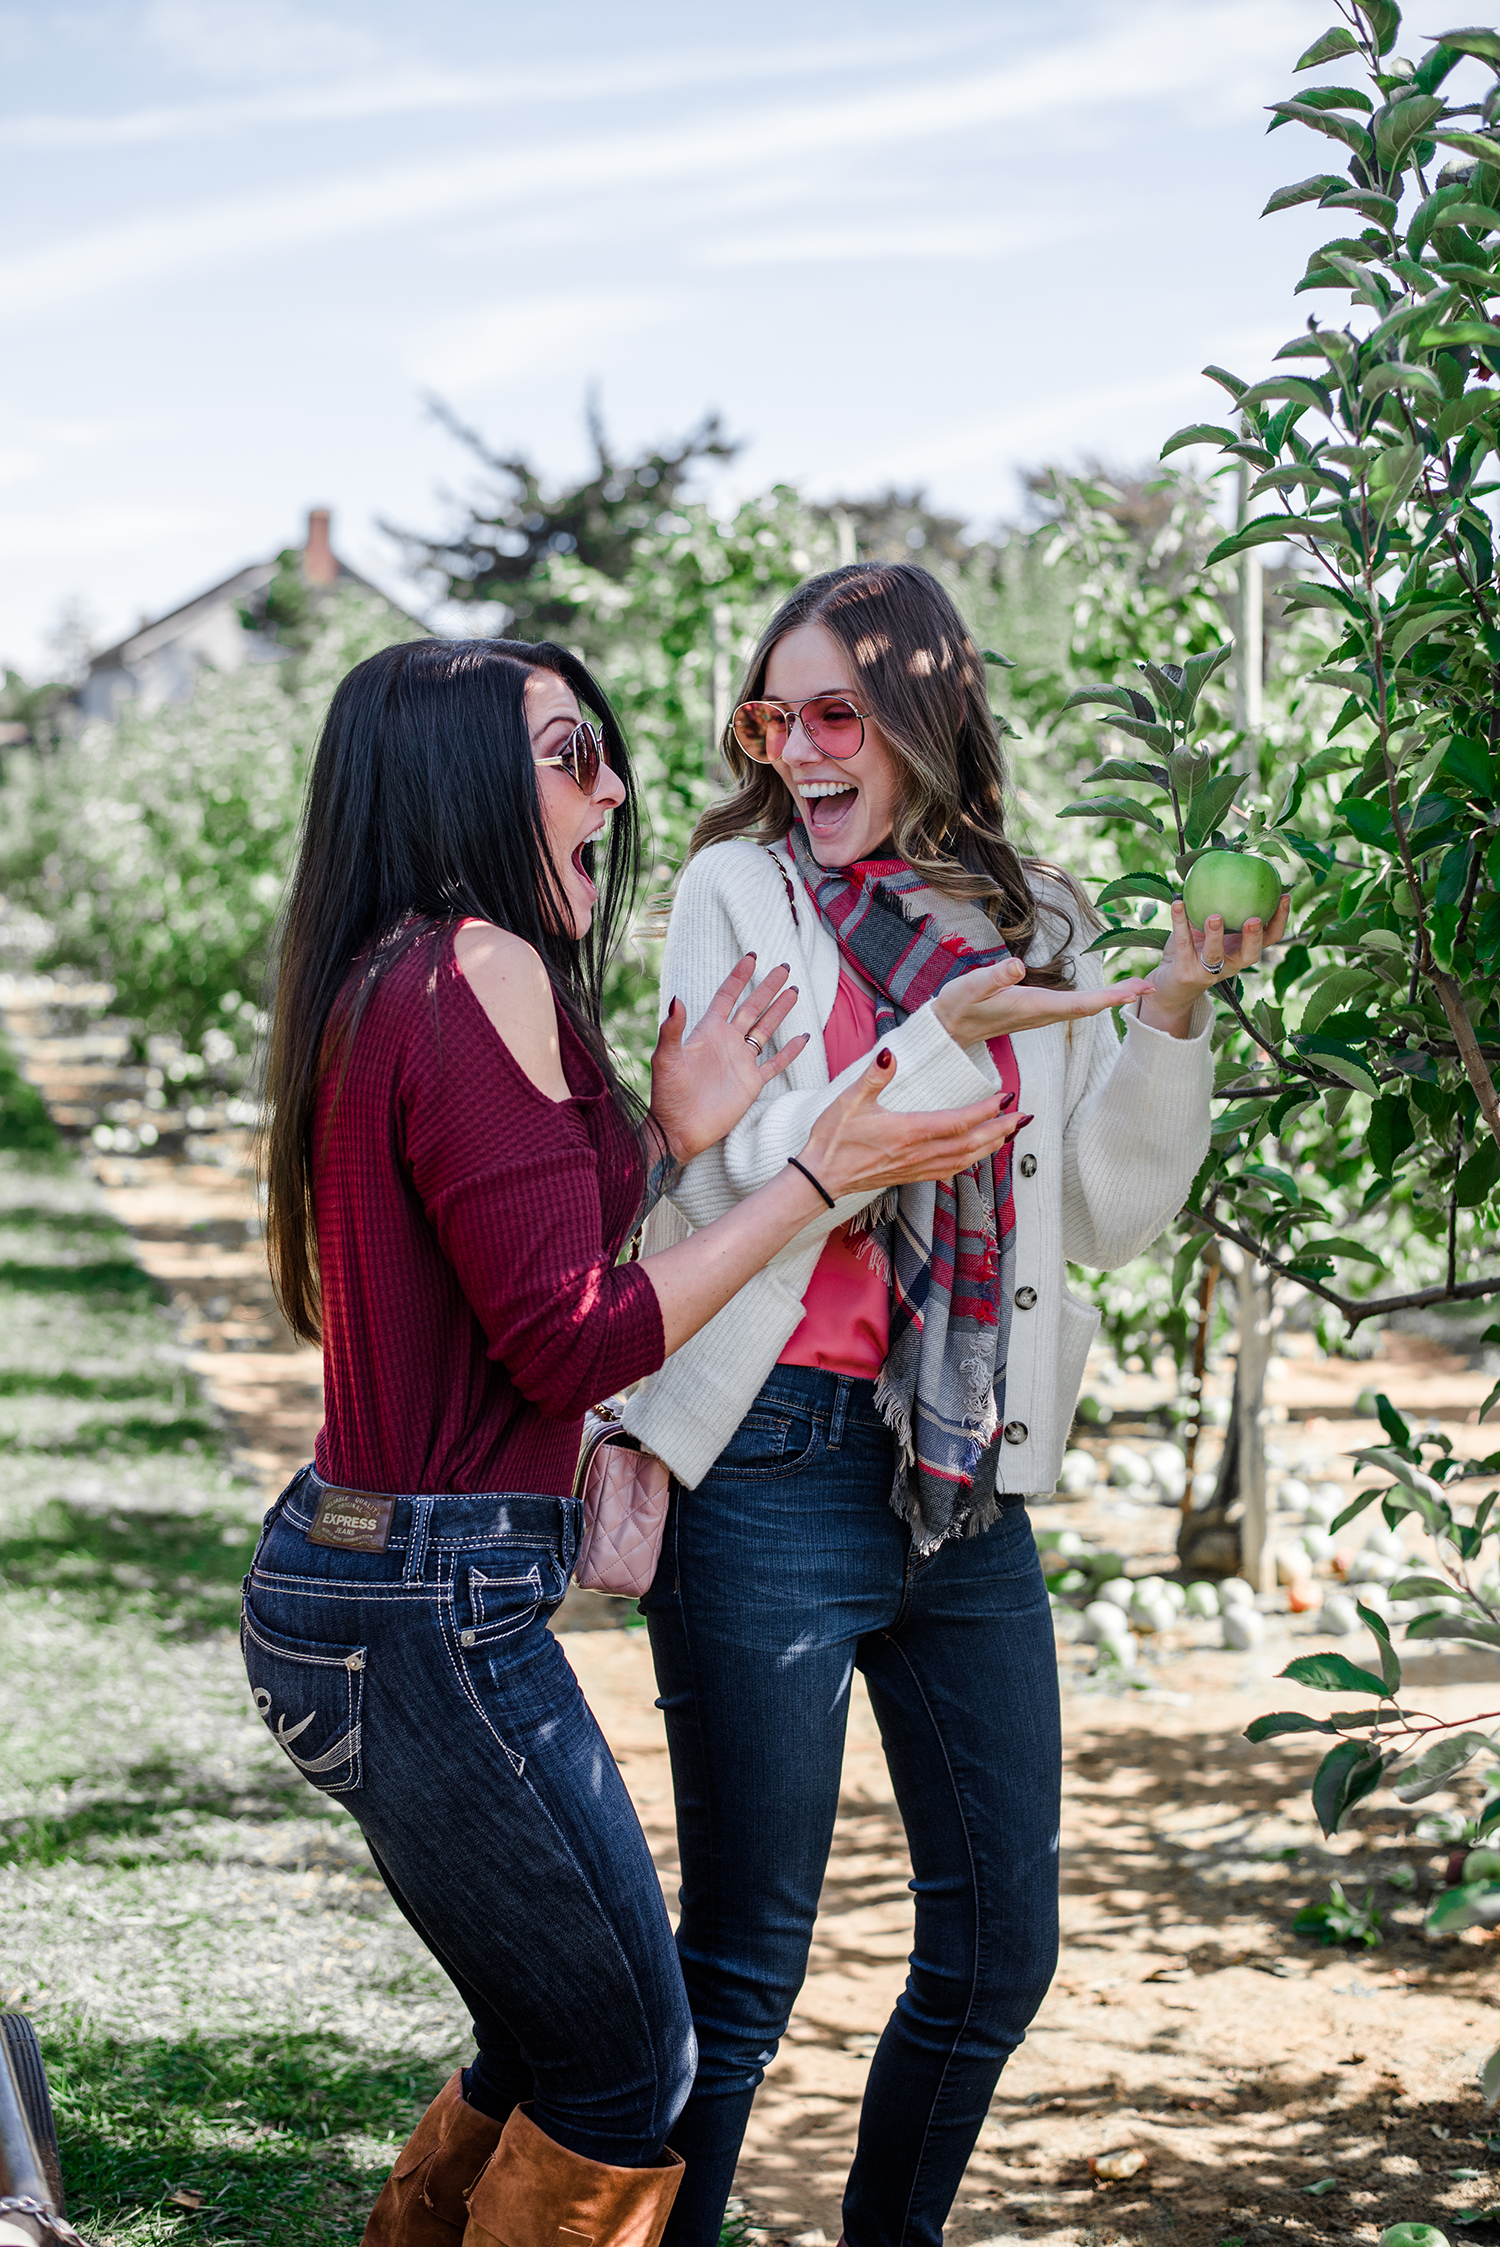 Alyssa Campanella of The A List blog goes apple picking in New Jersey with her sister Jessica